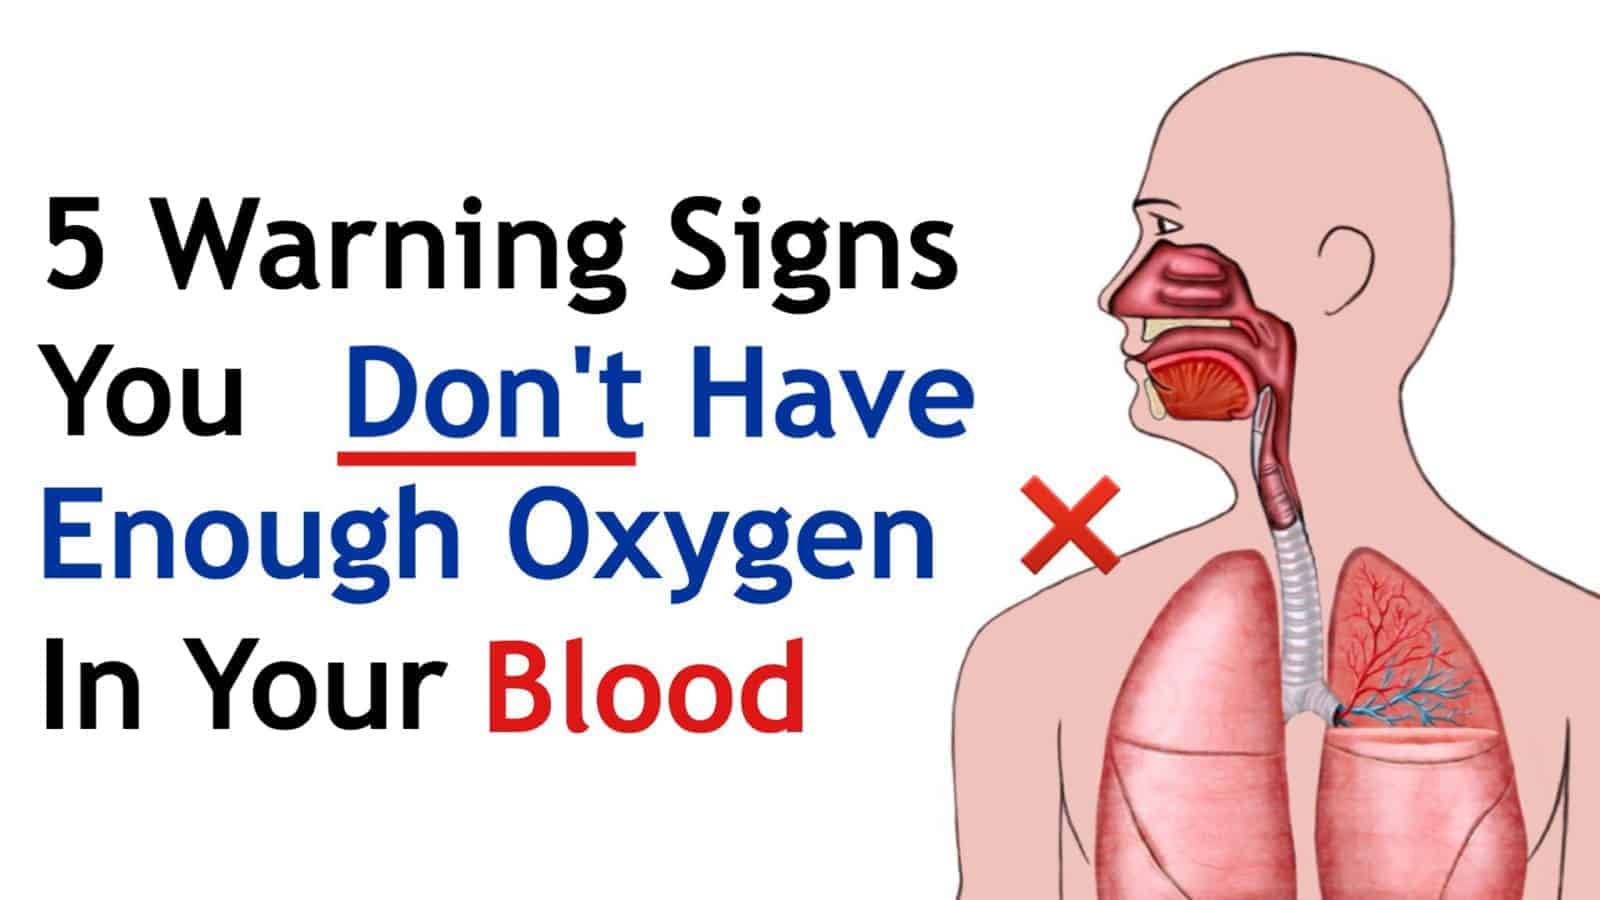 5 Warning Signs You Don’t Have Enough Oxygen In Your Blood